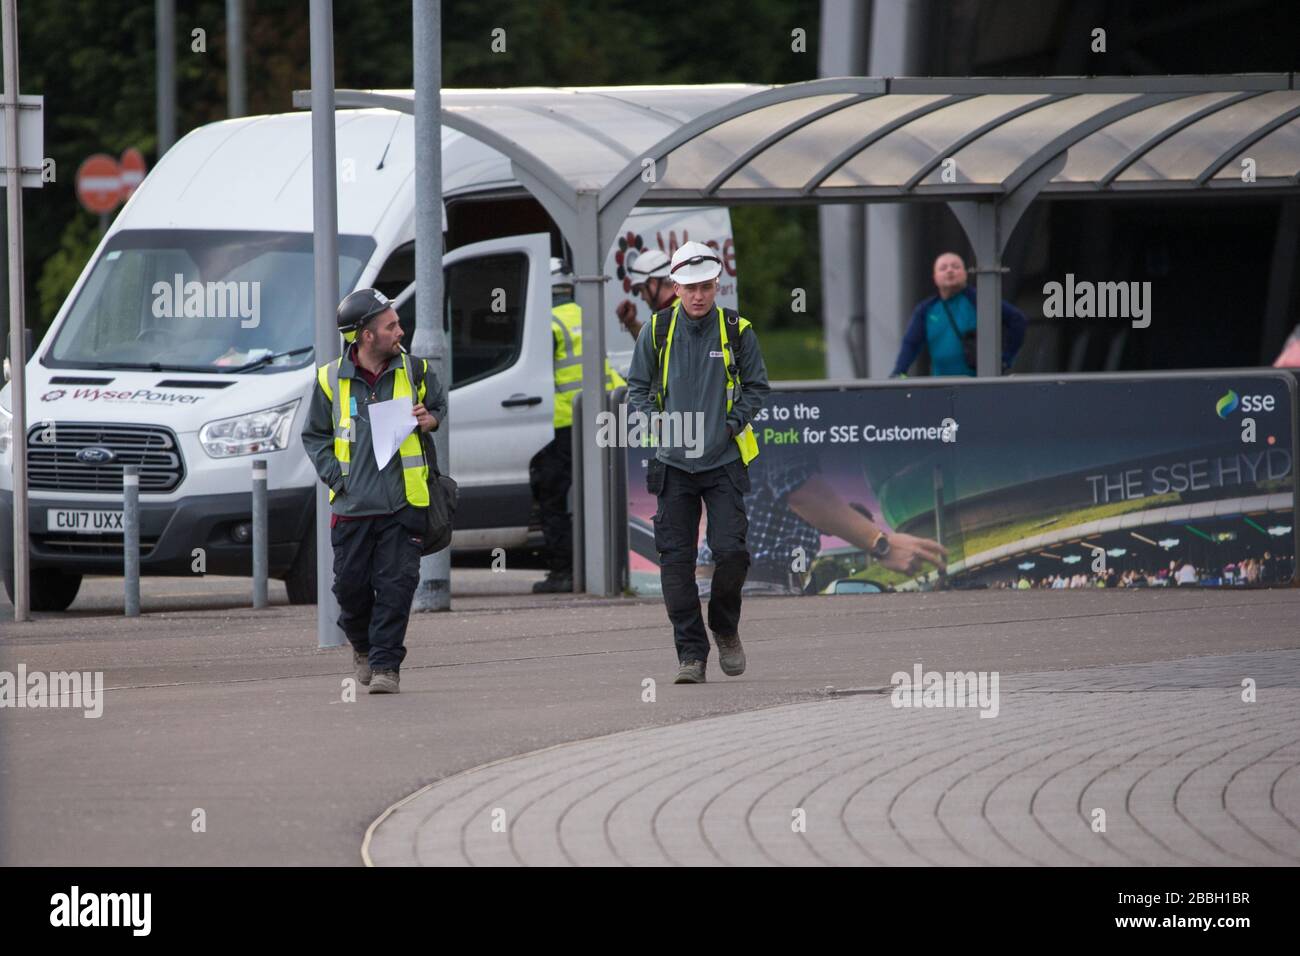 Glasgow, UK. 31st Mar, 2020. Pictured: Glasgow's SEC Campus is being turned into a temporary NHS hospital as part of the UK's response to the coronavirus outbreak. Credit: Colin Fisher/Alamy Live News Stock Photo